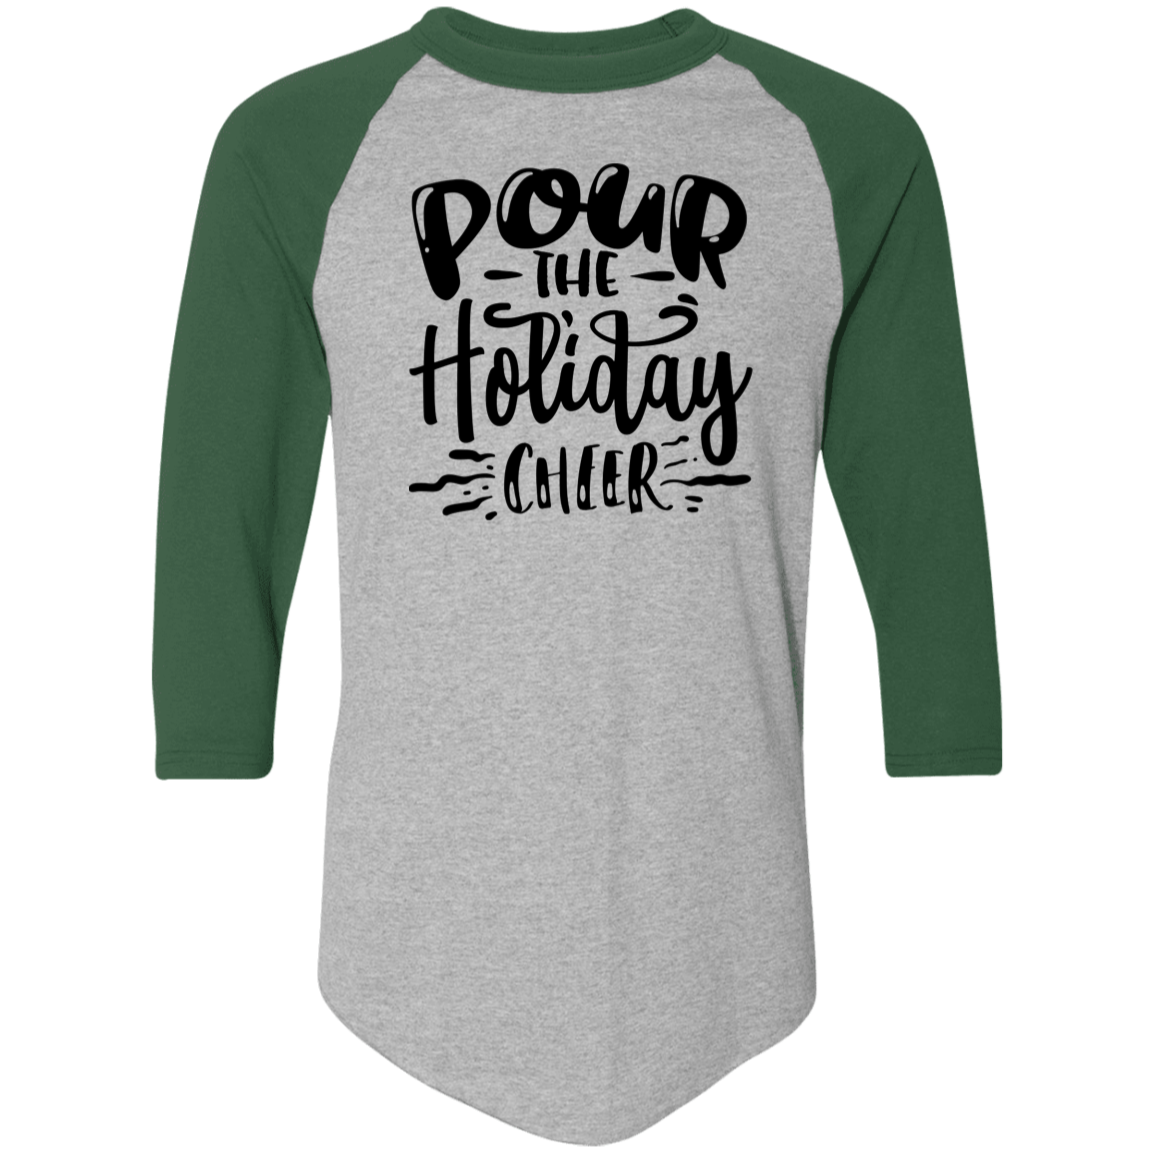 Pour The Holiday Cheer 4420 Colorblock Raglan Jersey